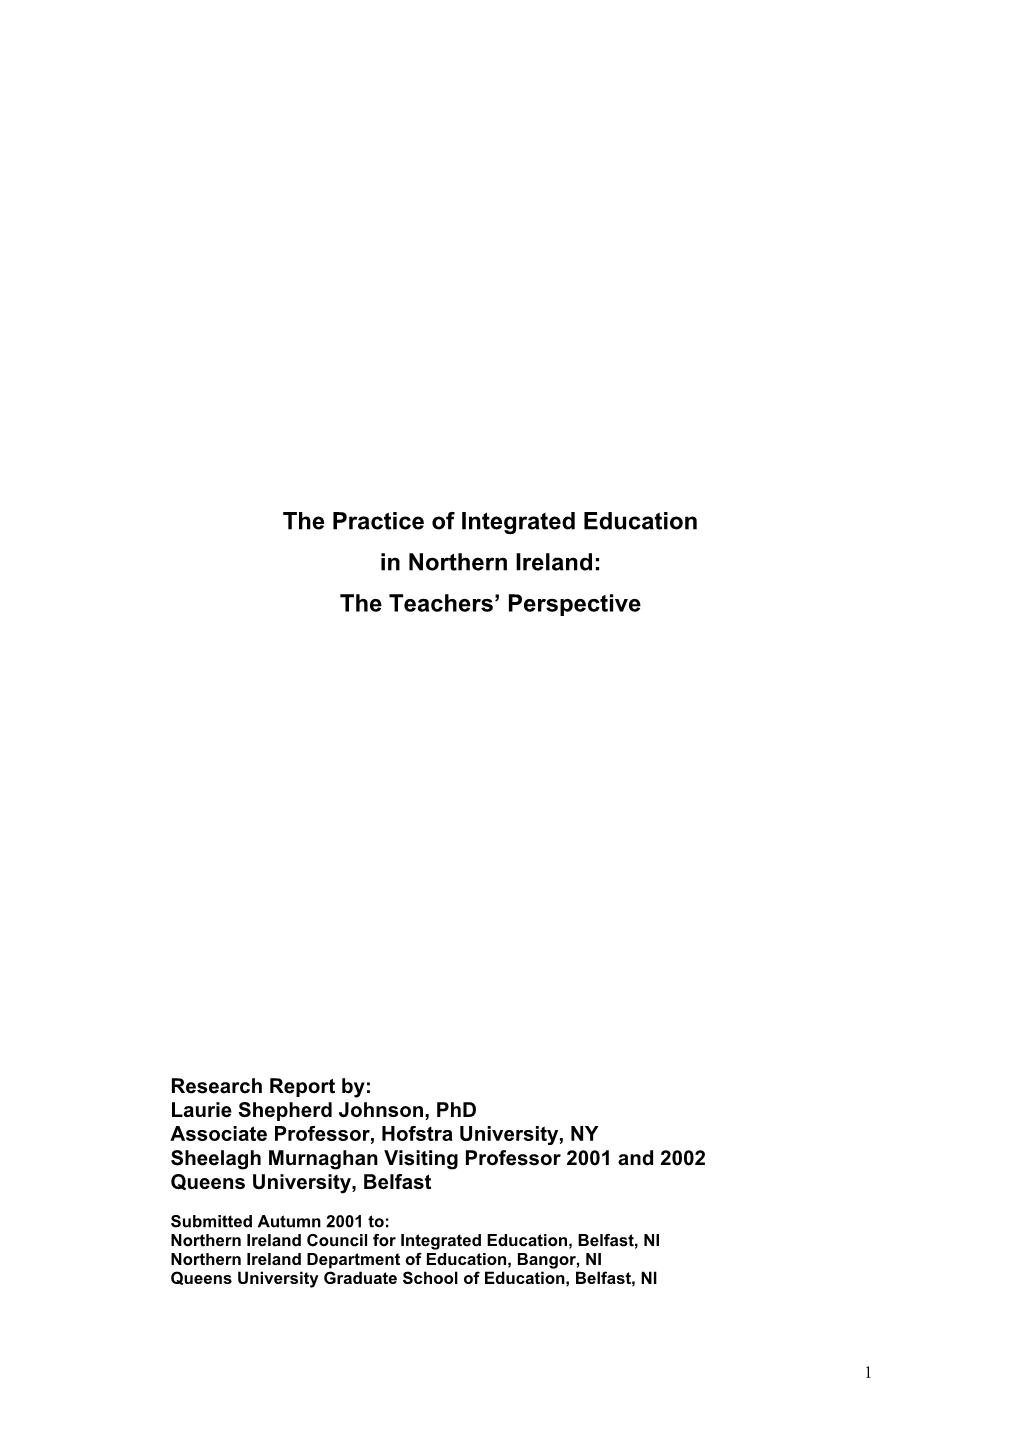 The Practice of Integrated Education in Northern Ireland: the Teachers’ Perspective